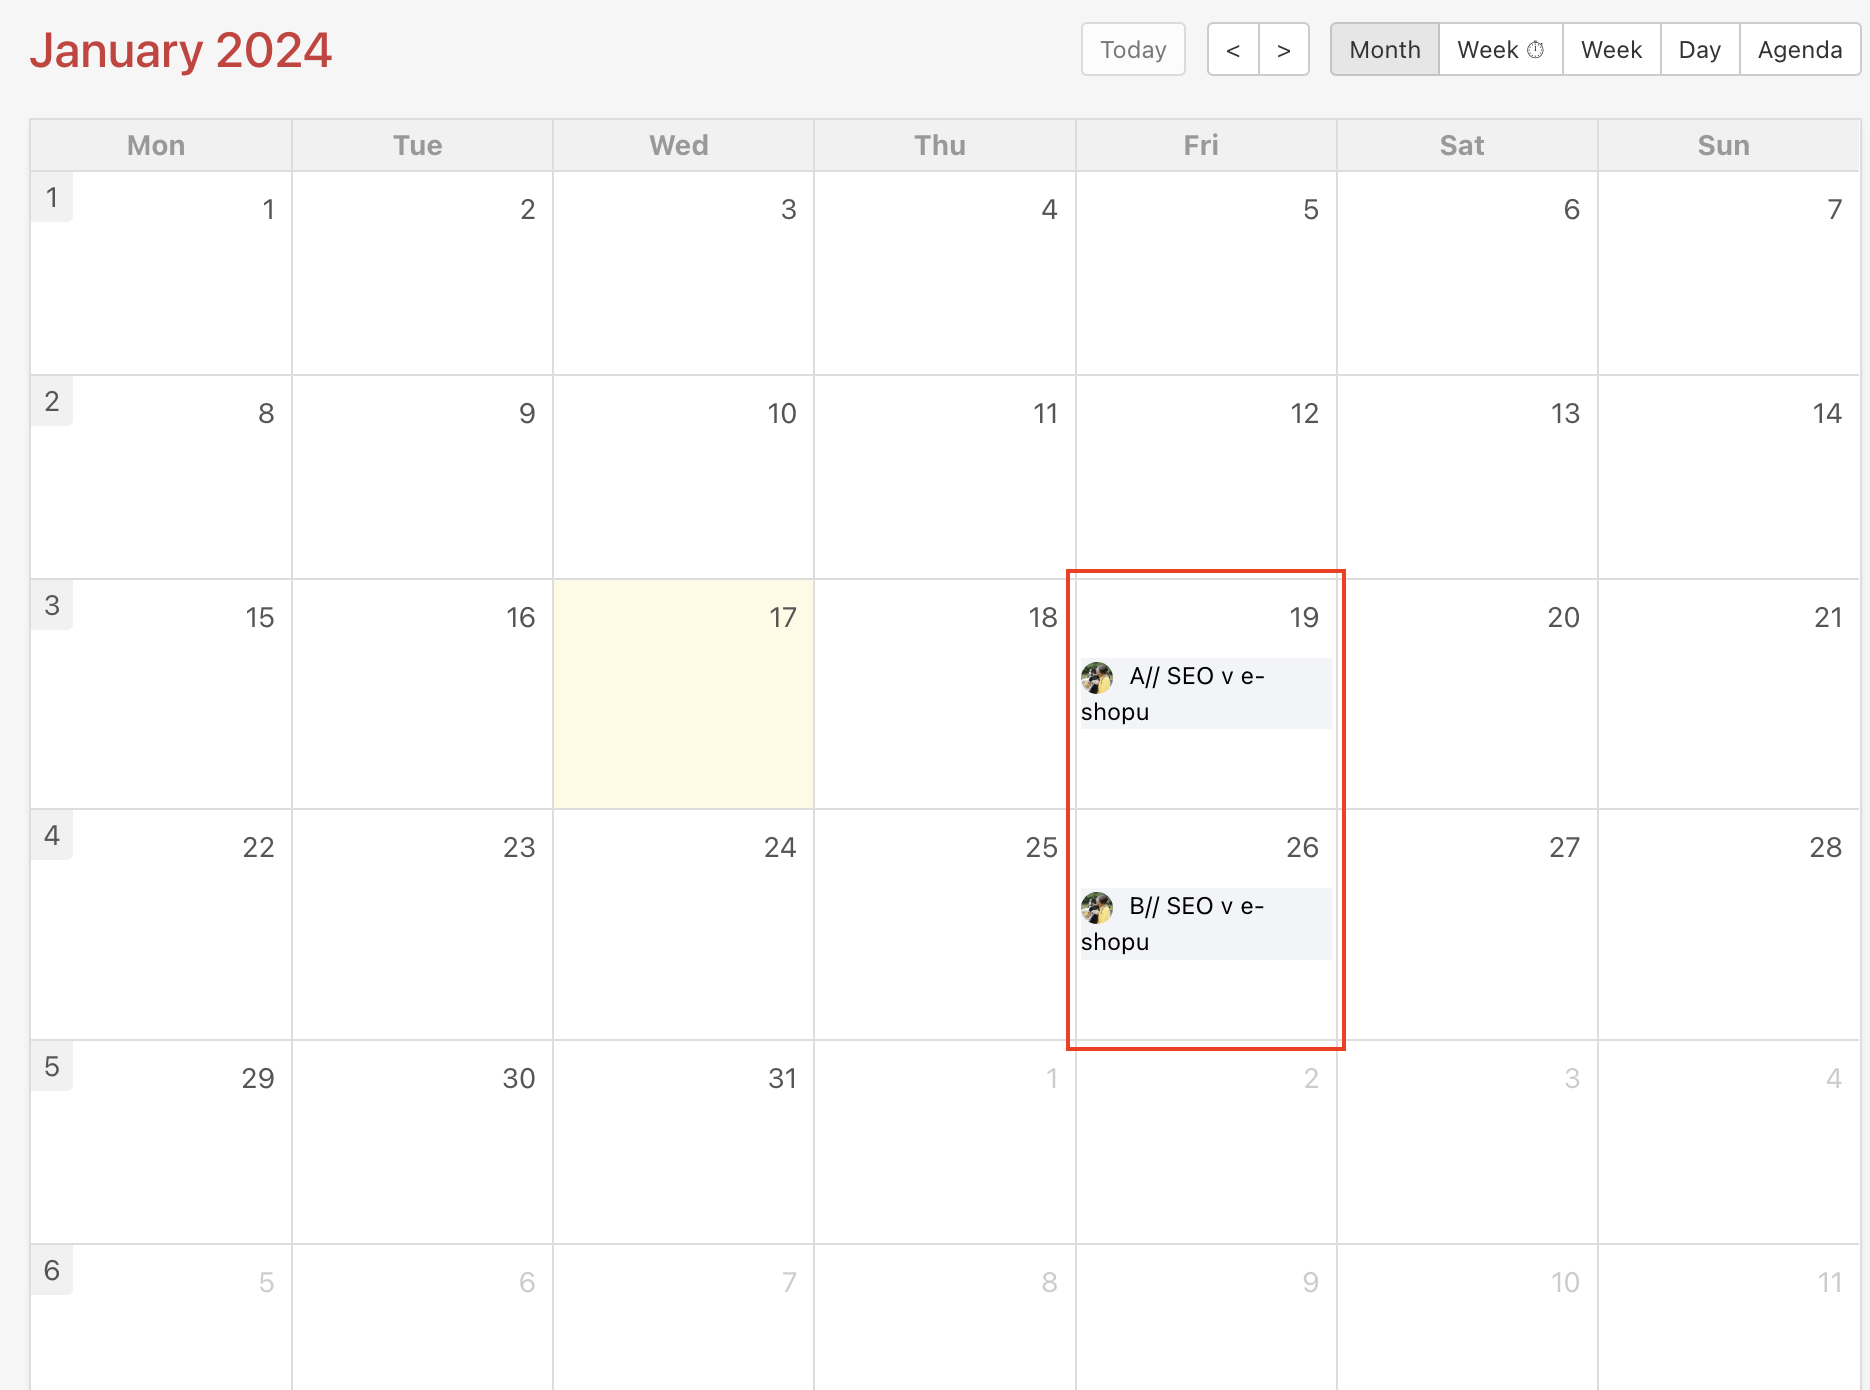 Example of repeated tasks visible in the Calendar.